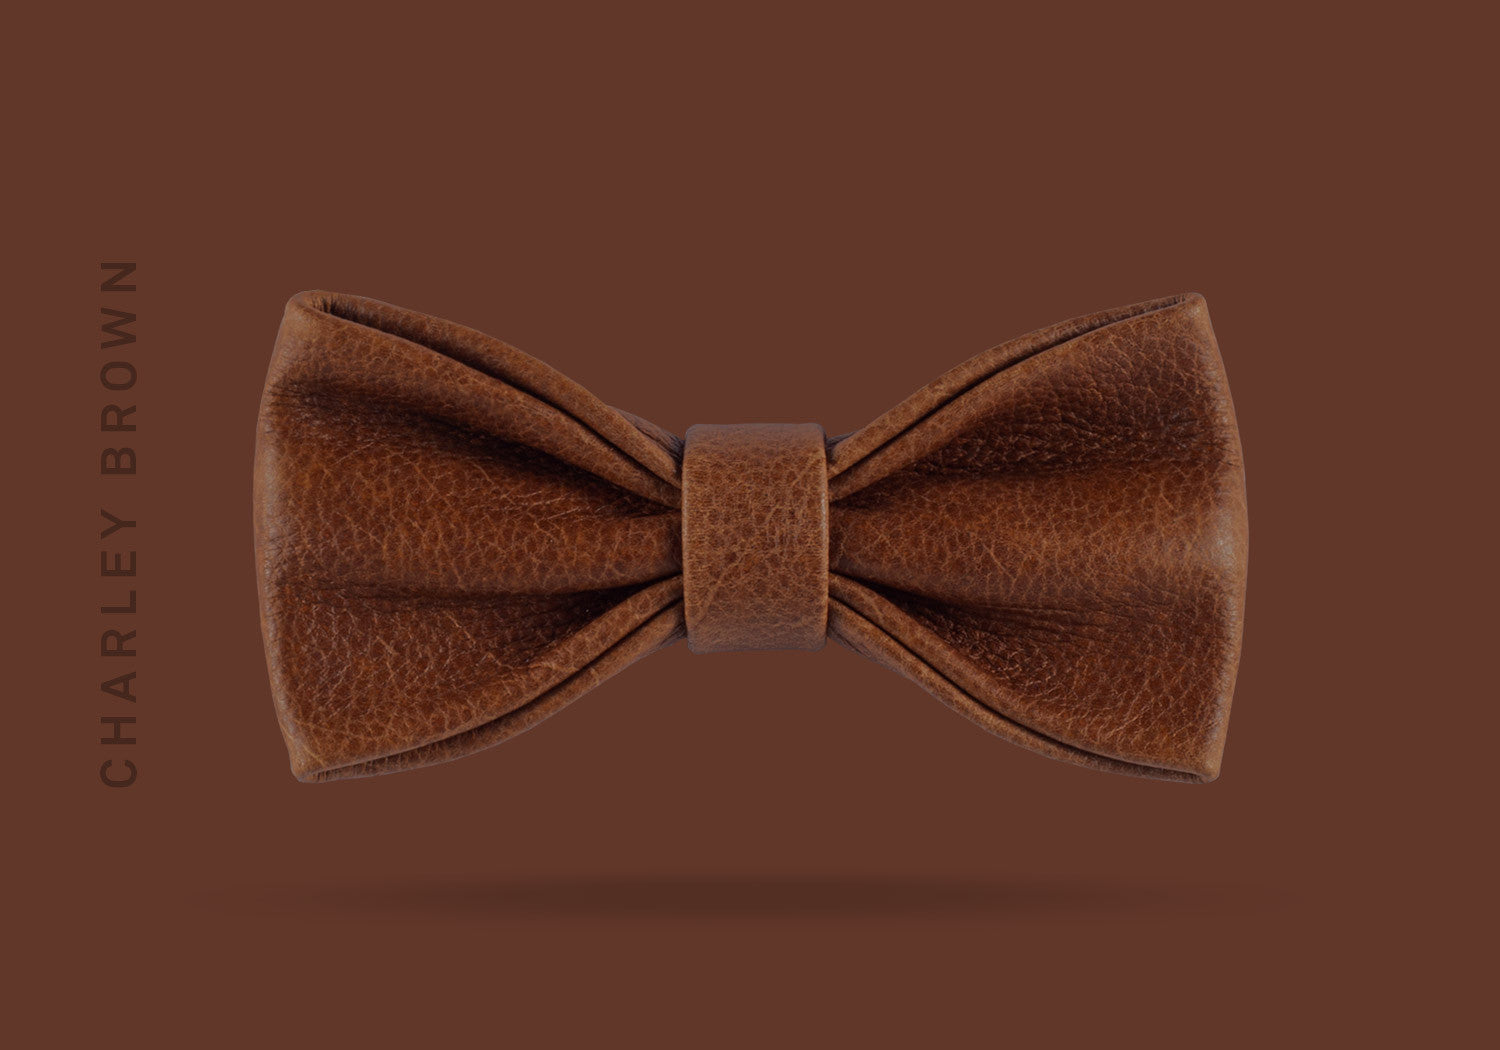 This charley brown WEEF handmade leather bow is a great present or gift idea for dapper and stylish gentlemen for fathers day, valentines day or Christmas.